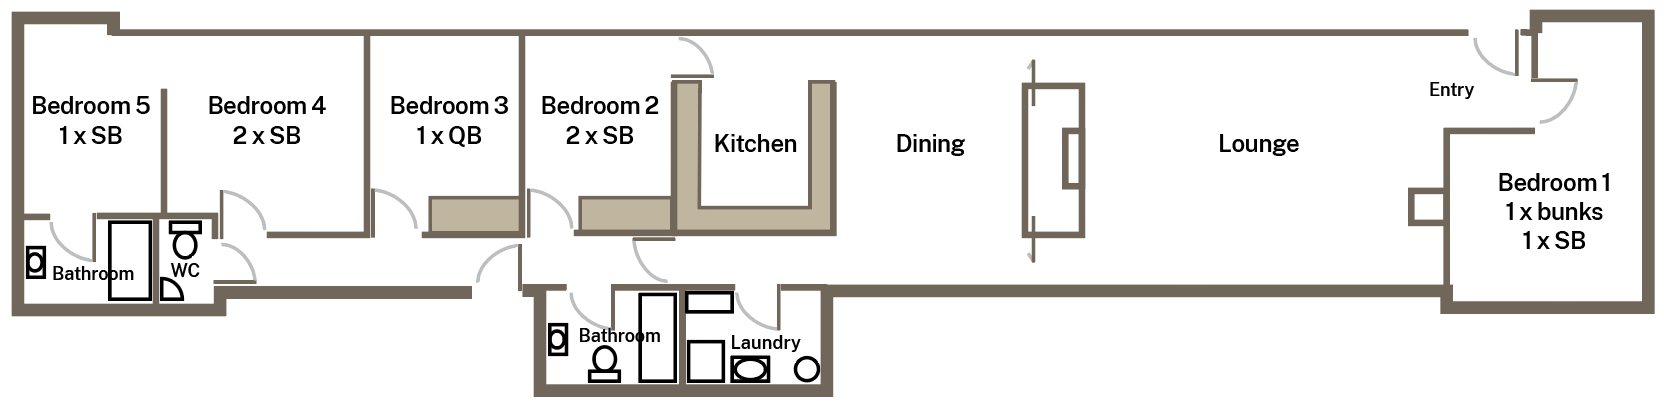 Layout of rooms